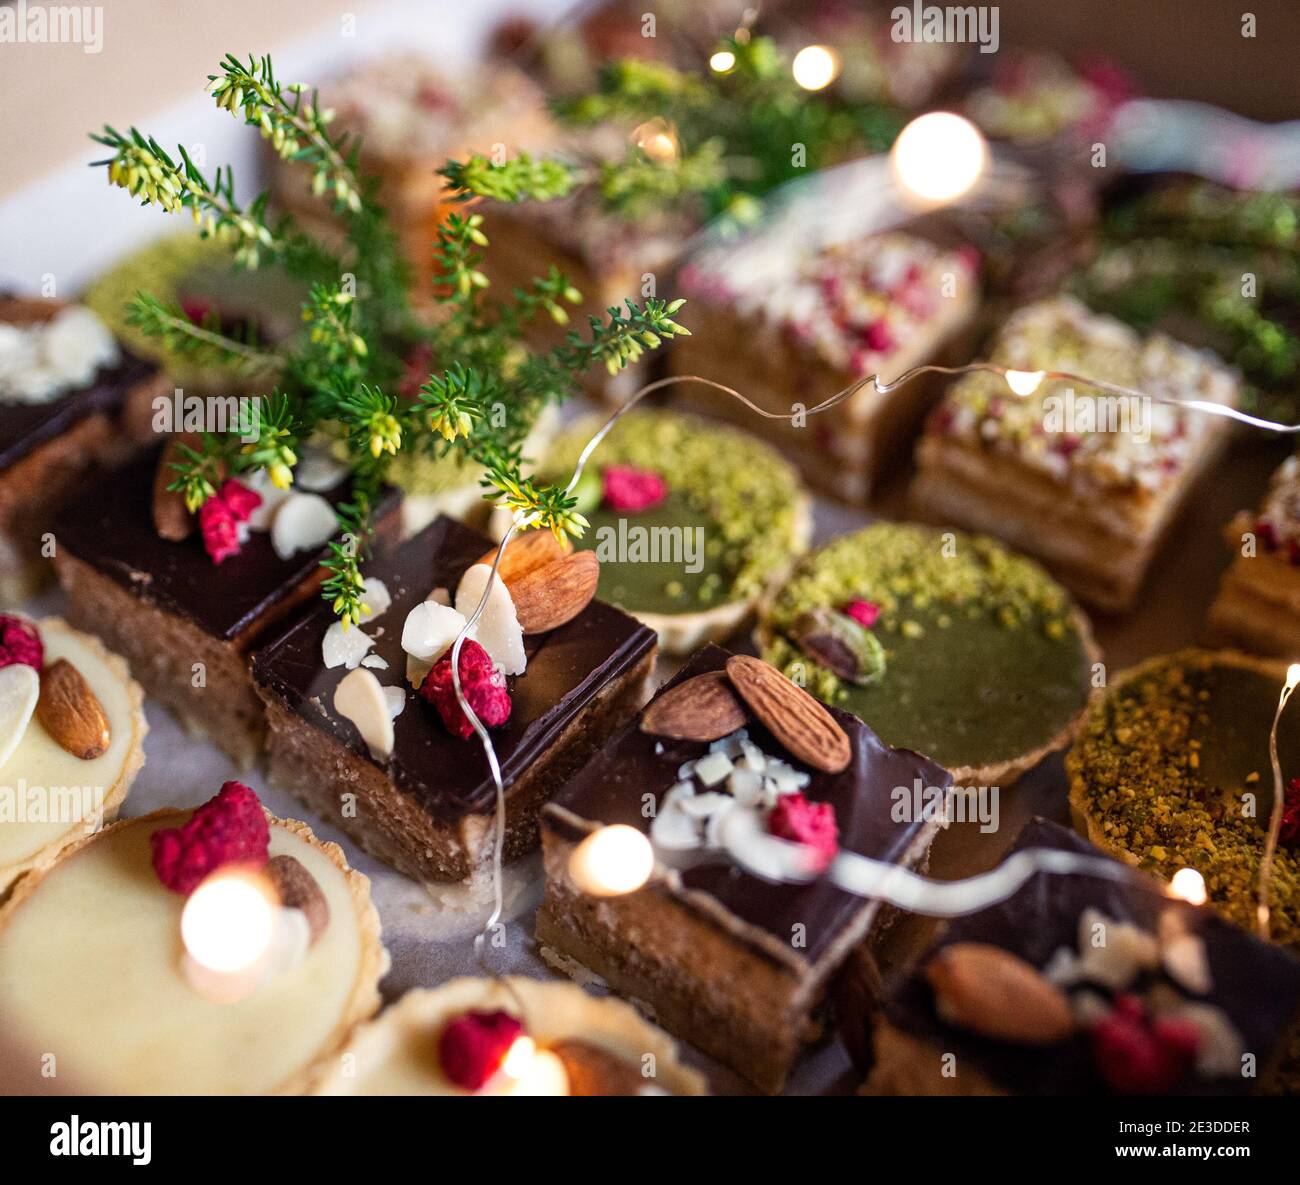 Selection of colorful and delicious cake desserts, close-up. Stock Photo